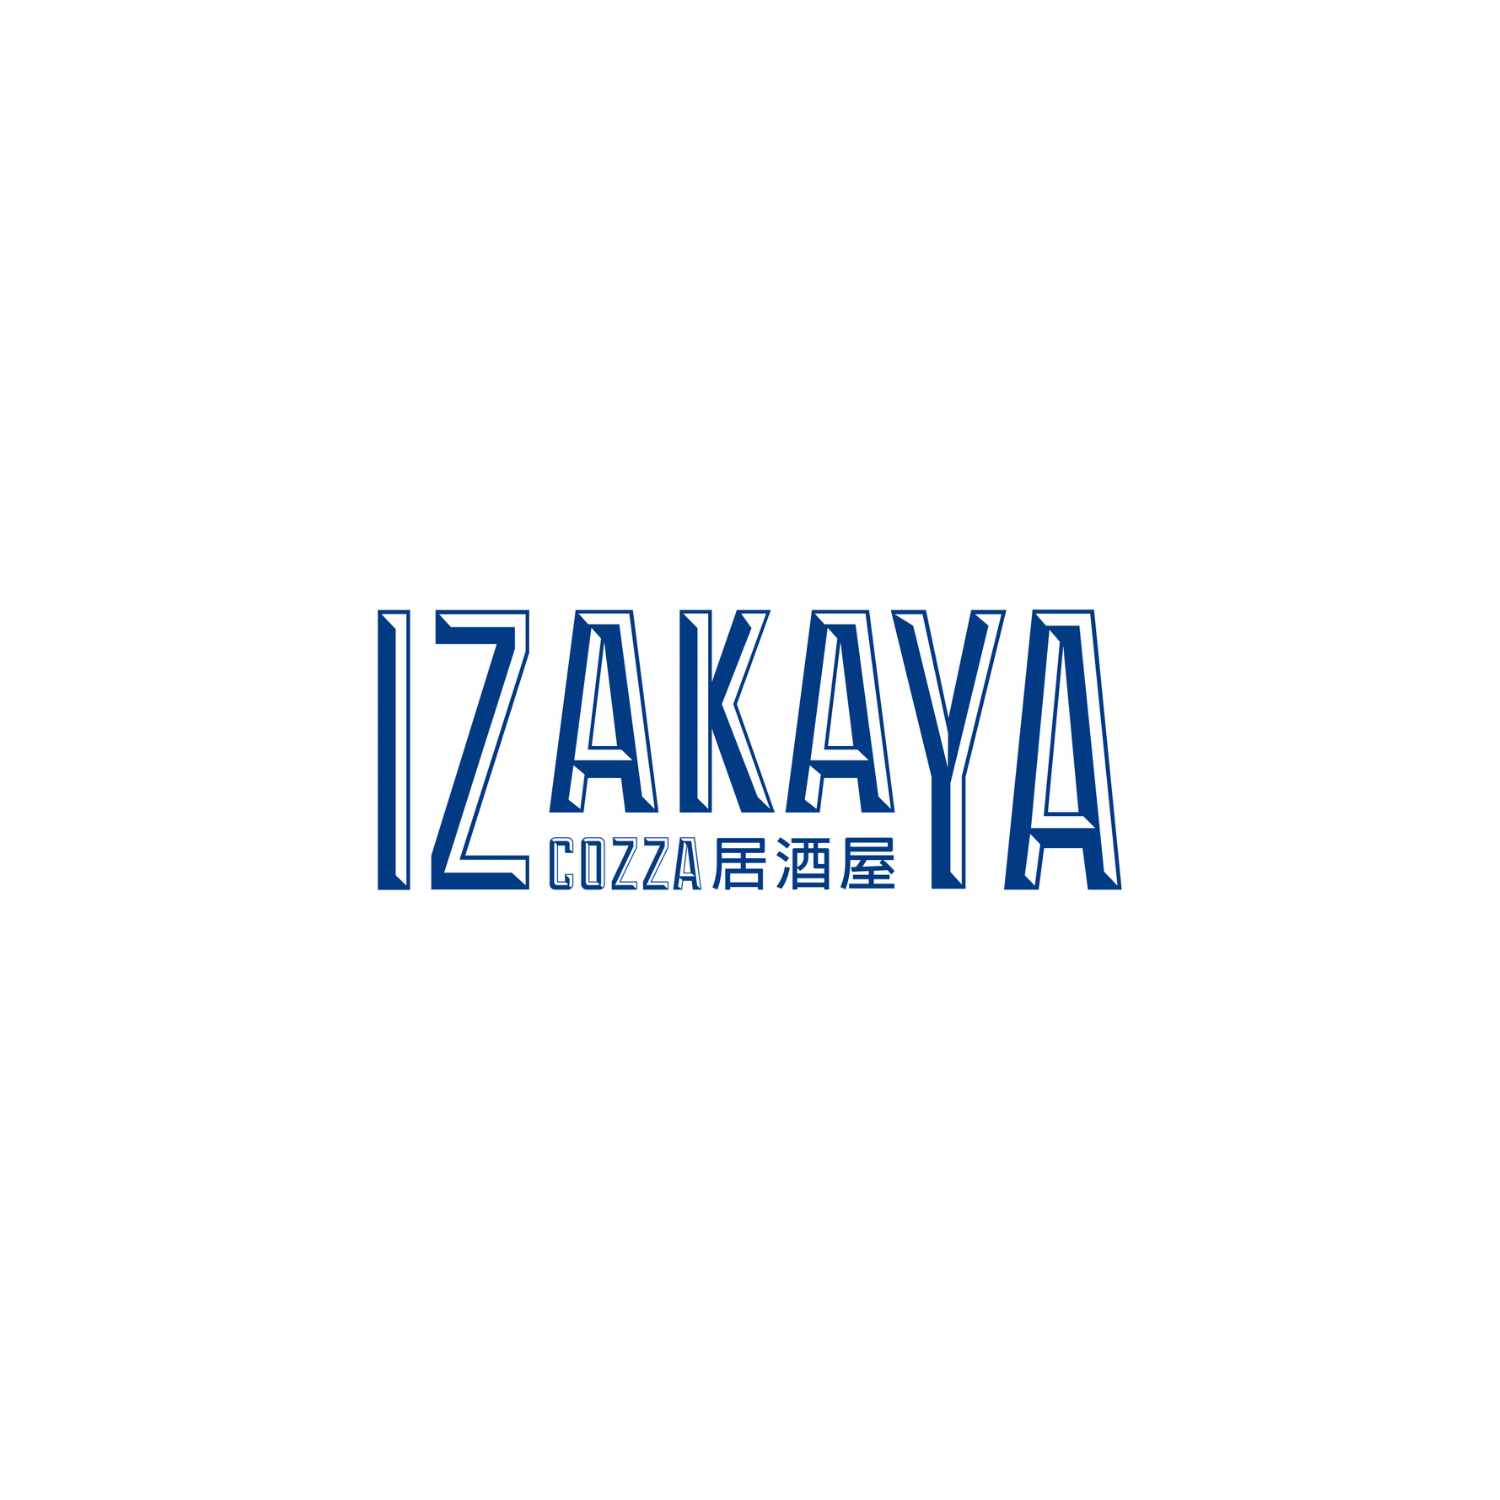 Read more about the article Izakaya